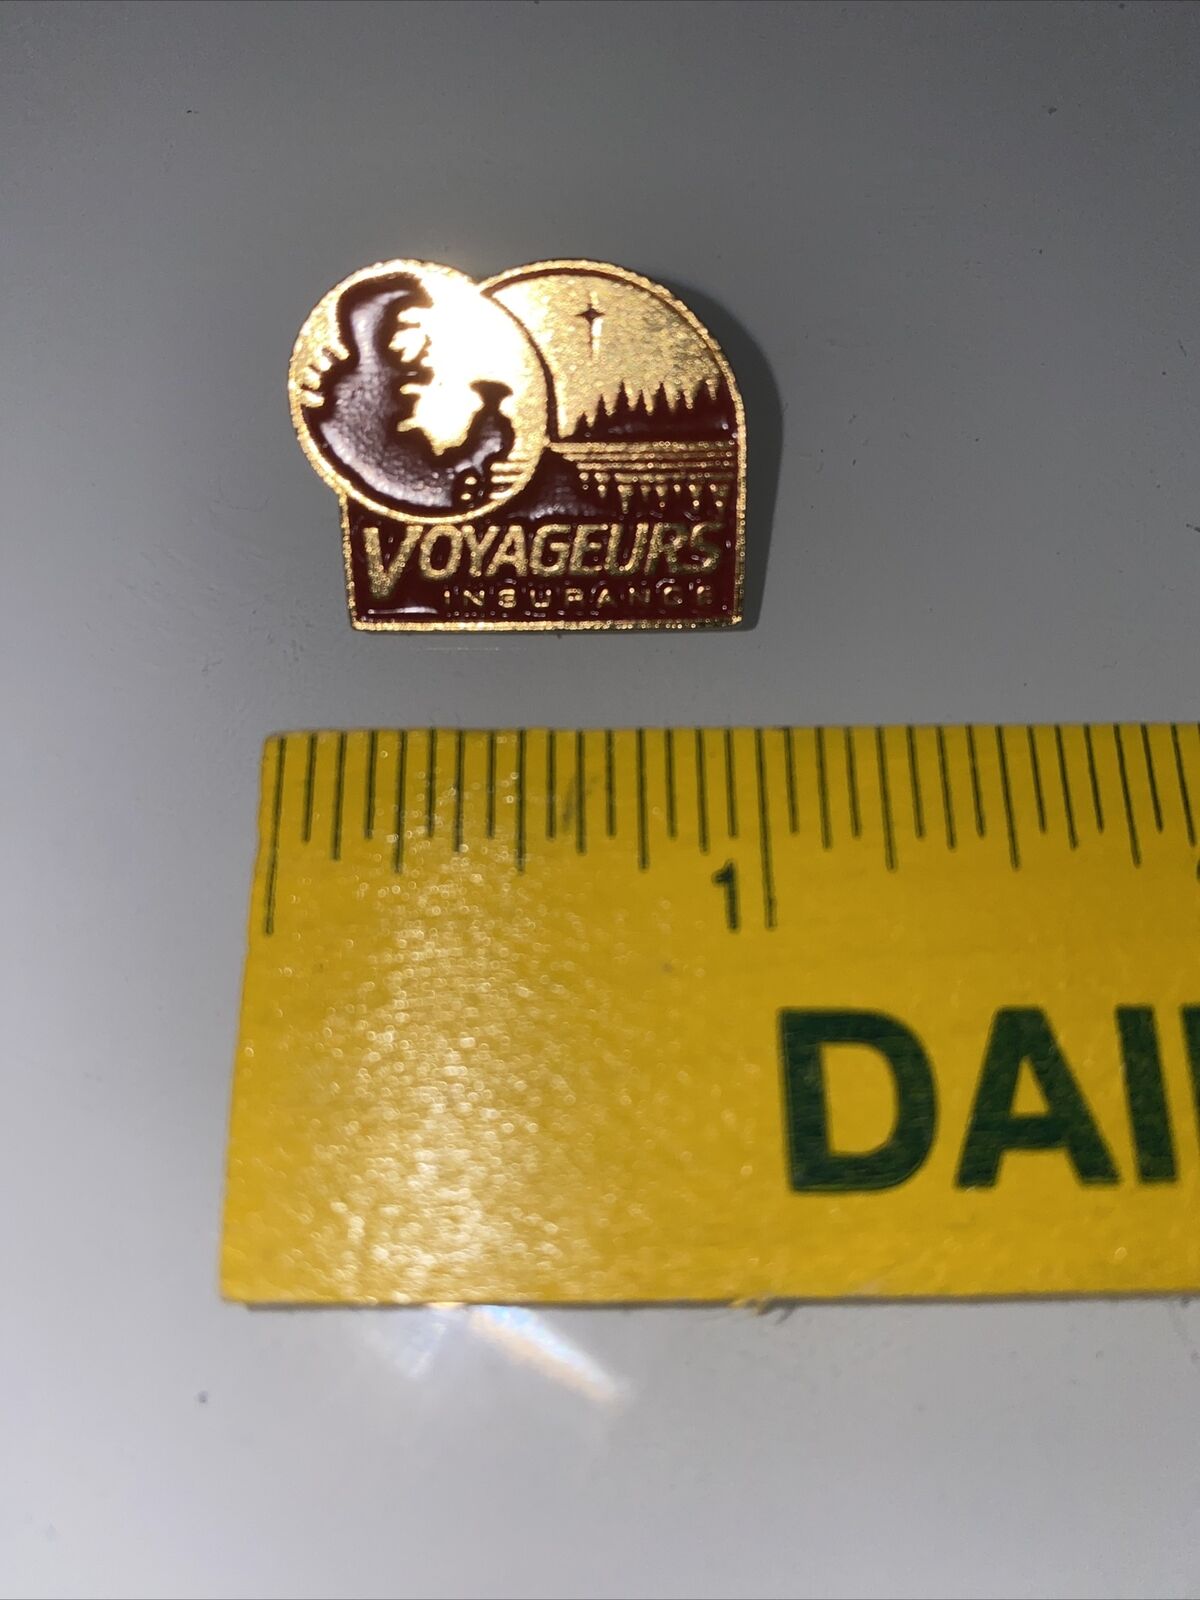 Voyageurs Insurance Lapel Pin Advertising Collector Vintage North Star Trees